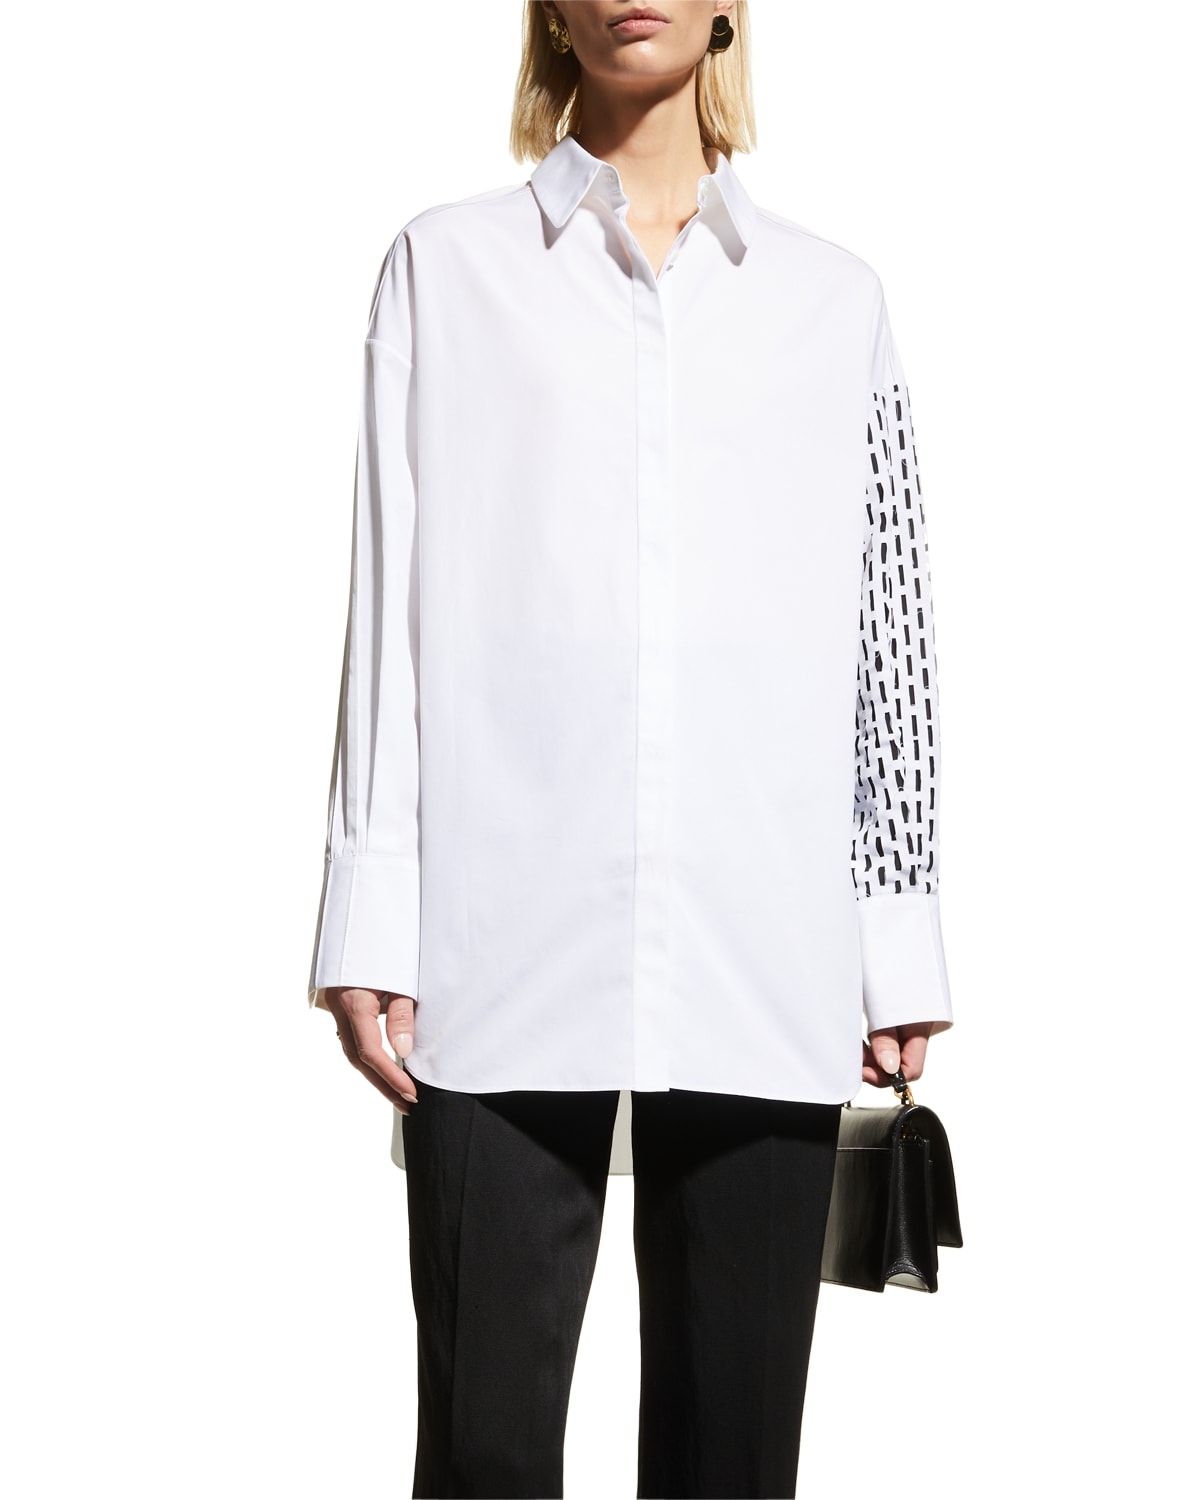 PARTOW Laser-Cut Sleeve High-Low Collared Shirt